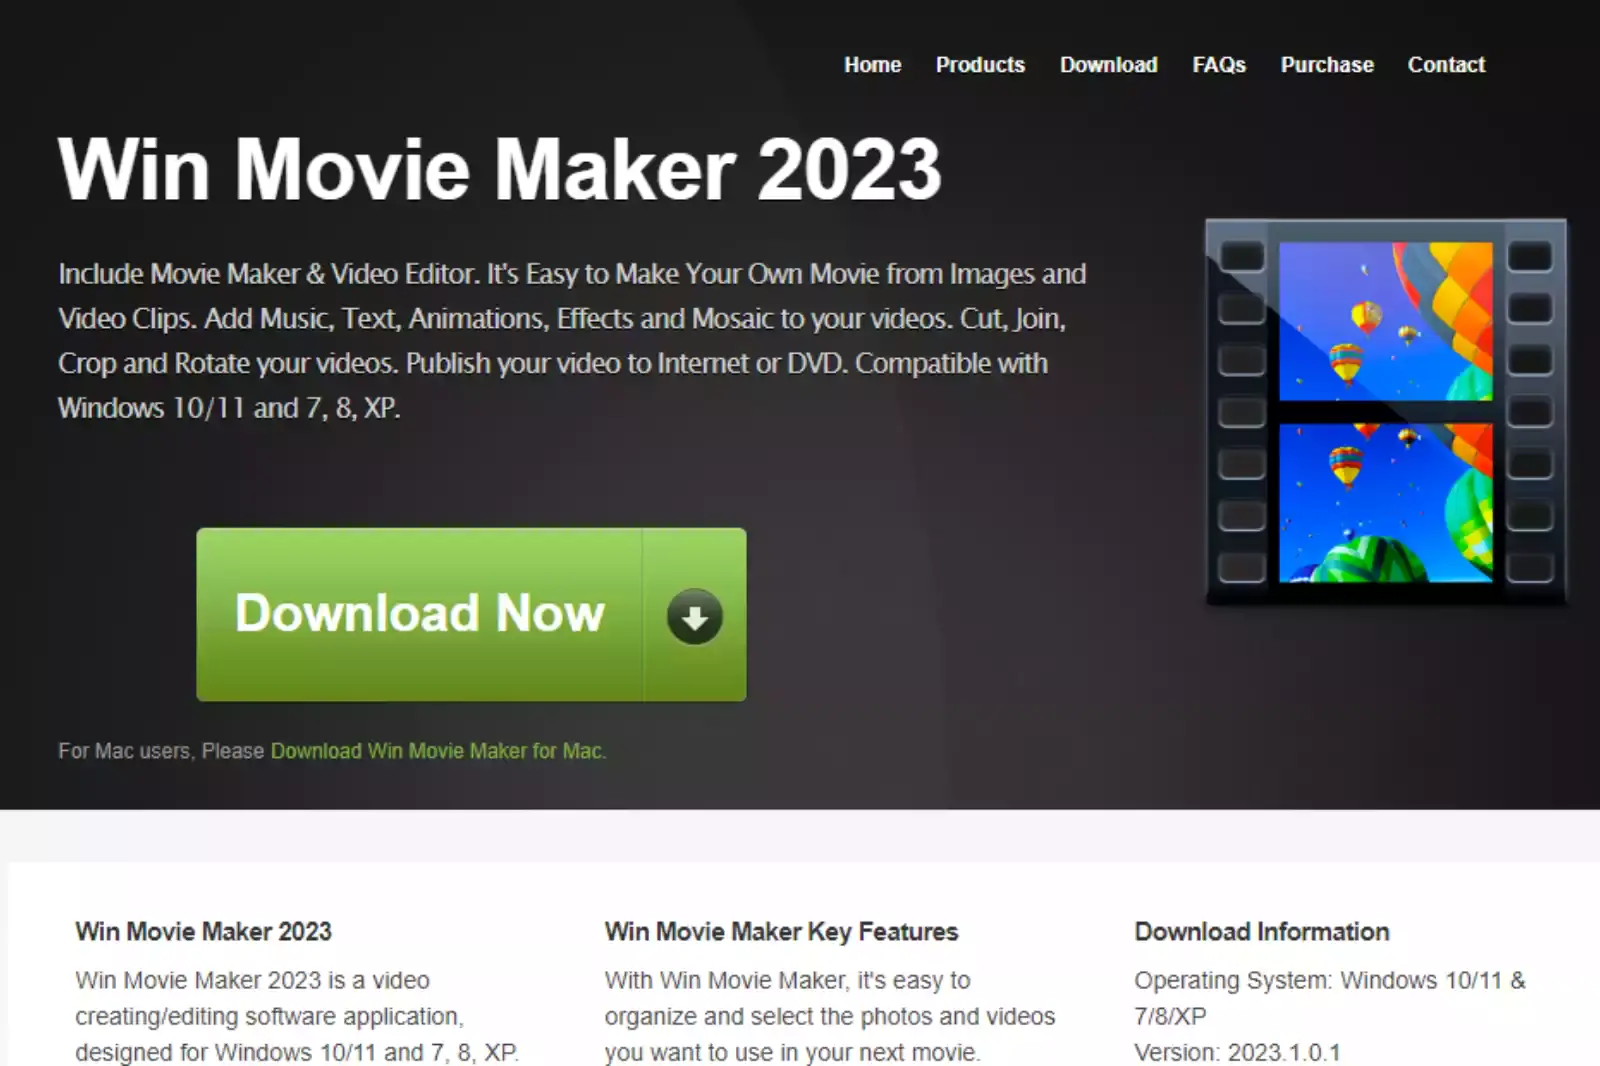 Home Page of Windows Movie Maker